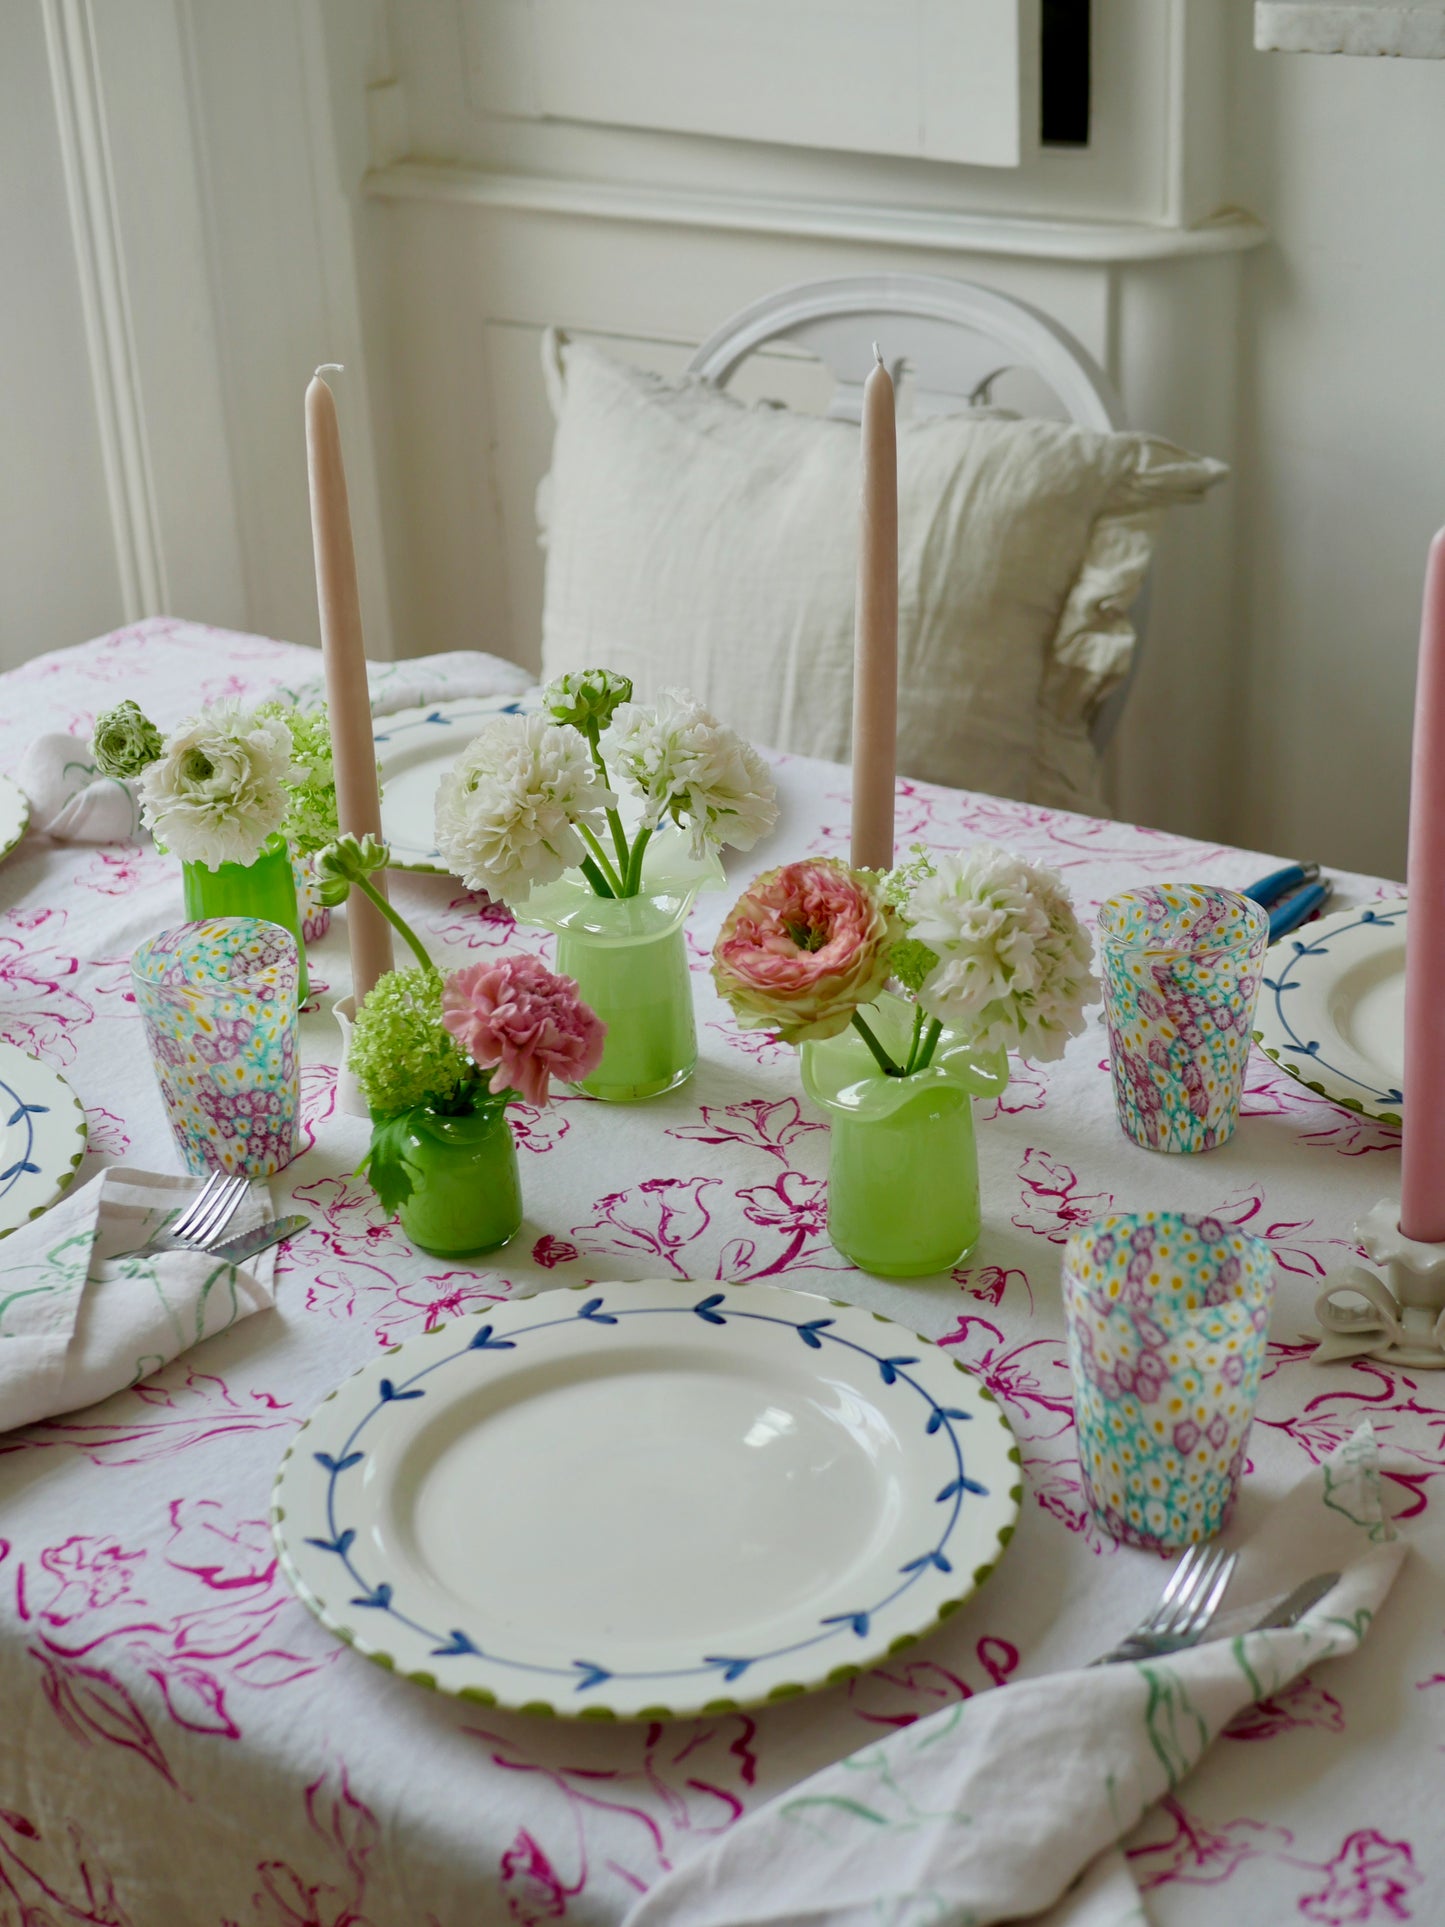 Wild Bloom, Pink Pure Linen Tablecloth